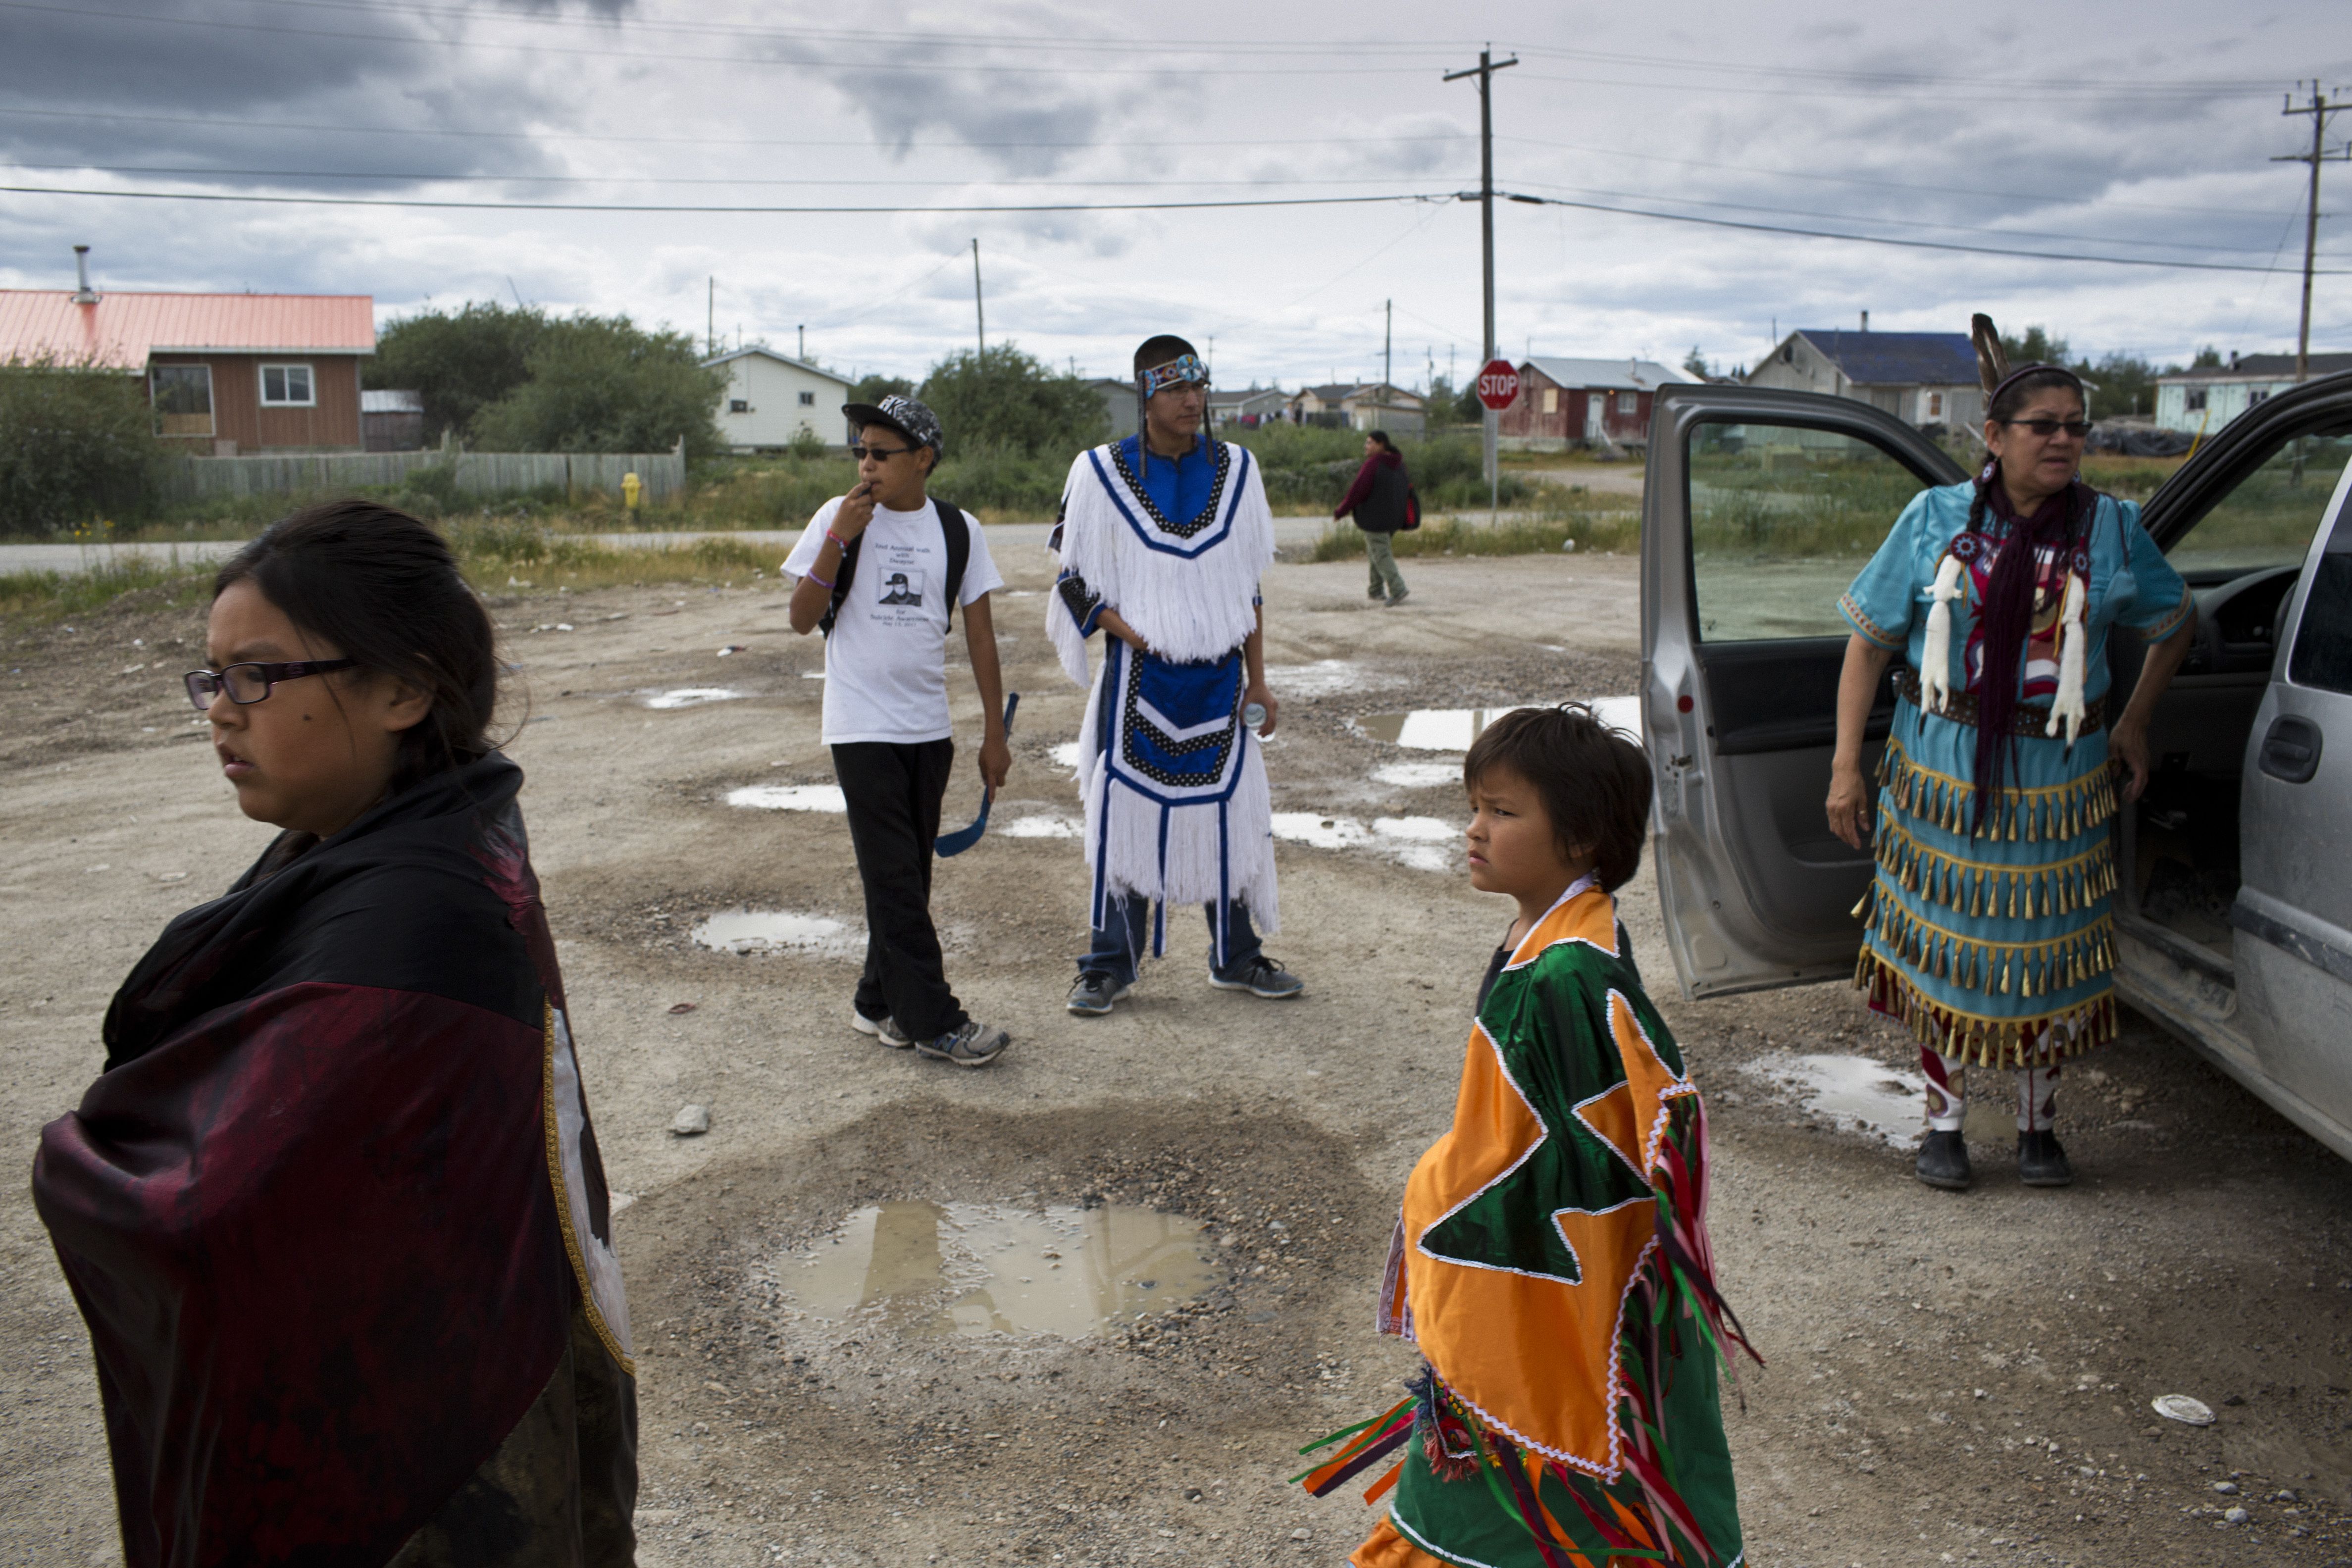 Pow Wow dancers gather outisde the Reg Louttit Arena in Attawapiskat after a practice. For many in the community, a return to traditional practices offers a hope for healing and connection and a way of navigating the challenges their people face. While the Canadian government is seen to be failing First Nations people by many in Attawapiskat, the community continues to approach the complex issues themselves. Image by David Maurice Smith. Canada, 2016.